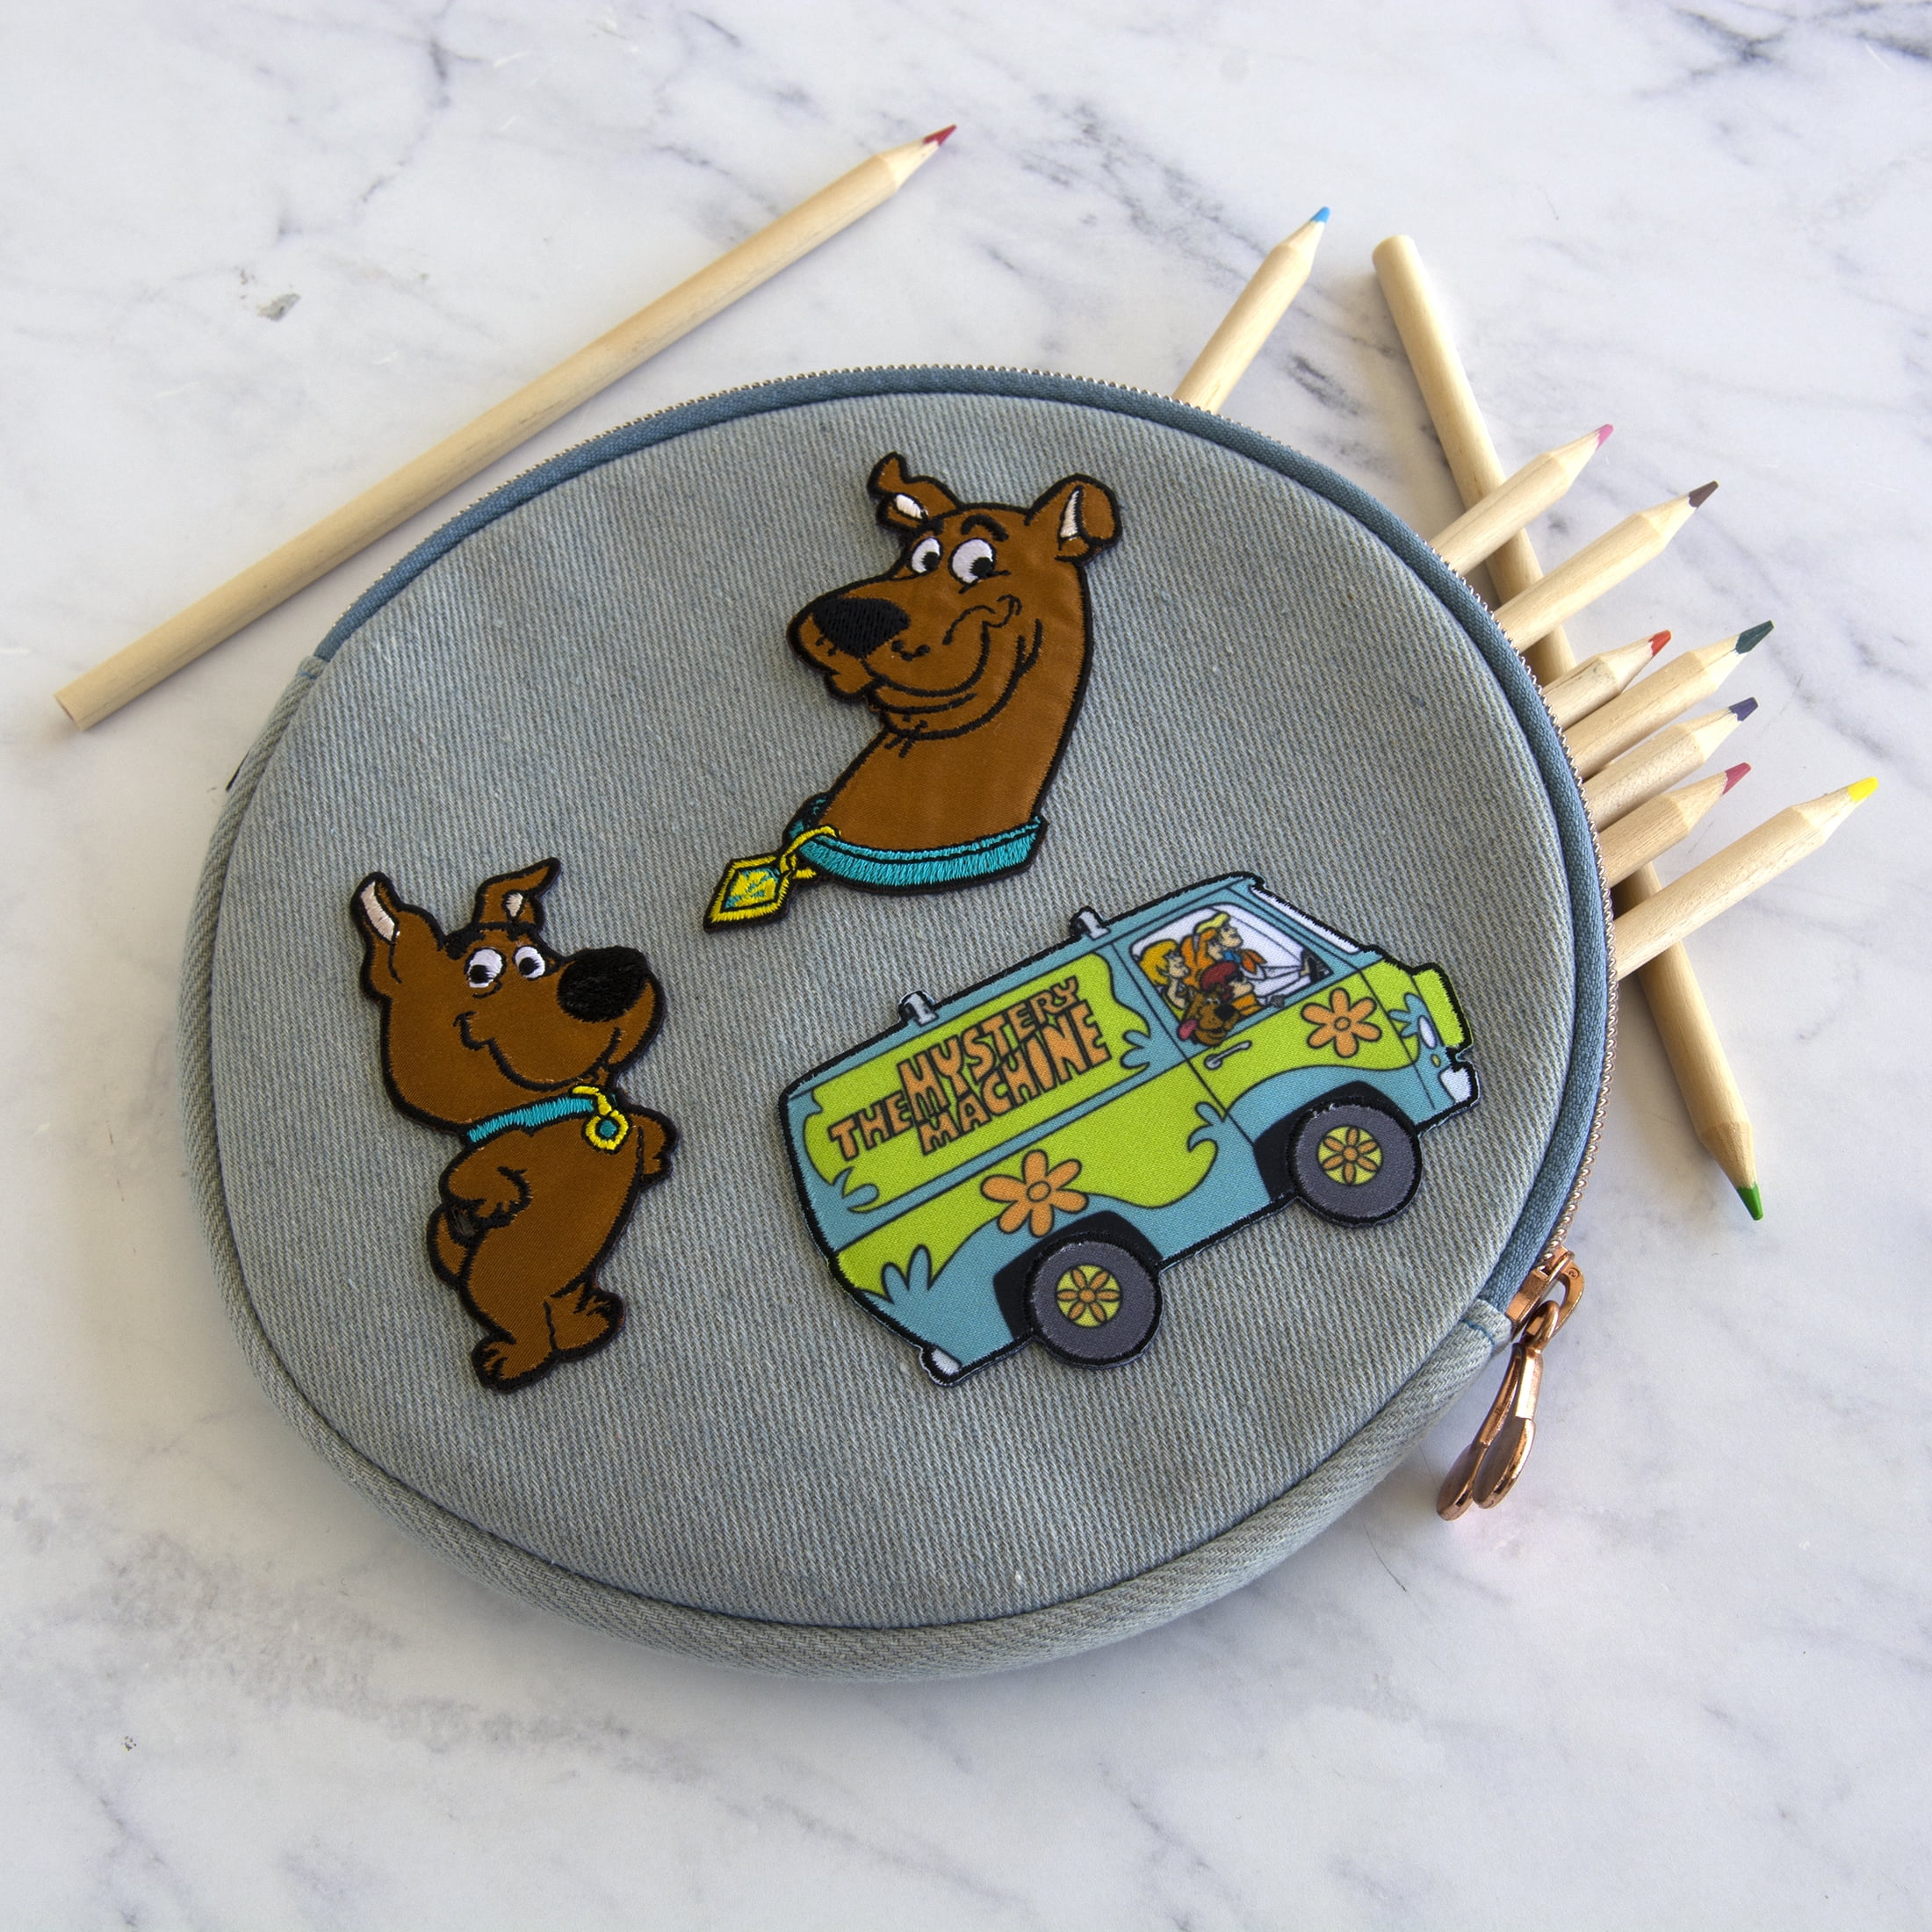 Simplicity Warner Bros. Scooby-Doo Iron-on Applique Embroidered